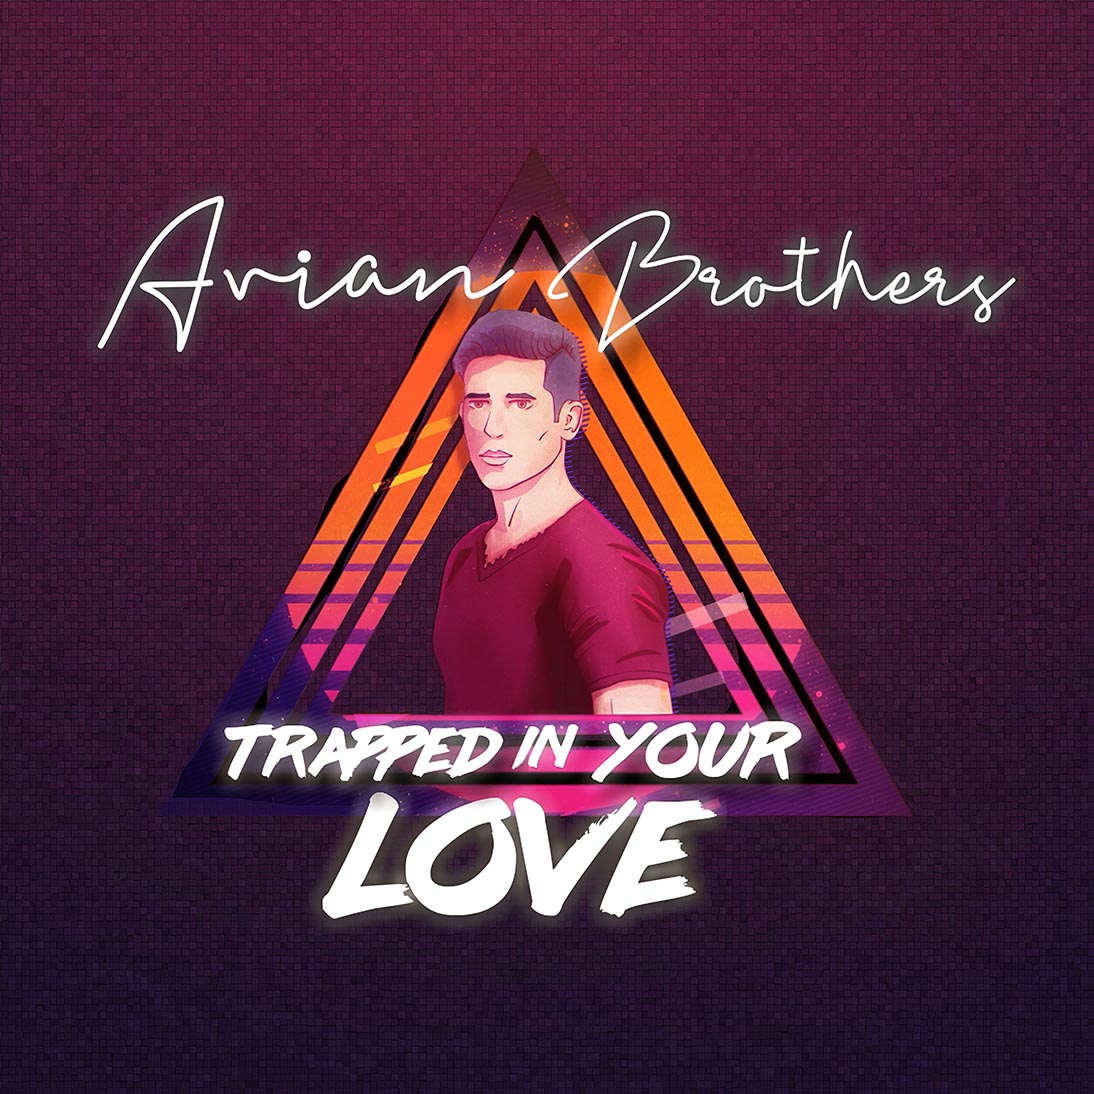 Avian Brothers - Trapped in Your Love Main Album cover Music, original songs, albums, remixes and covers Created by Henrik Veres , #henrikveres #avianbrothers